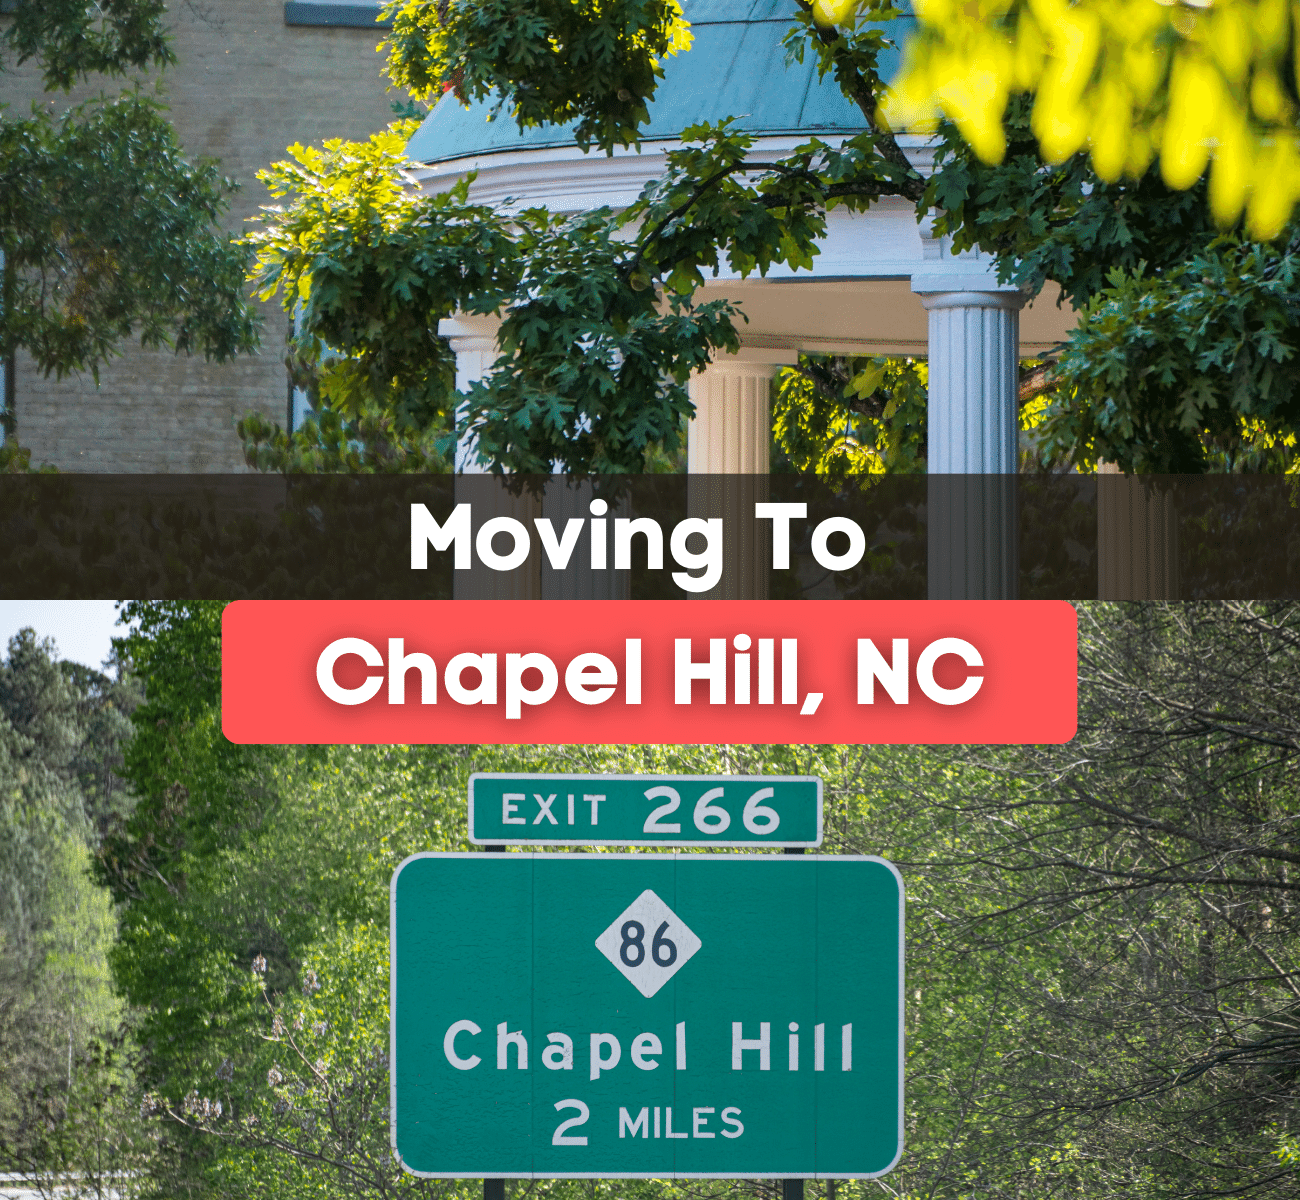 5 Things You Should Know BEFORE Moving to Chapel Hill, NC